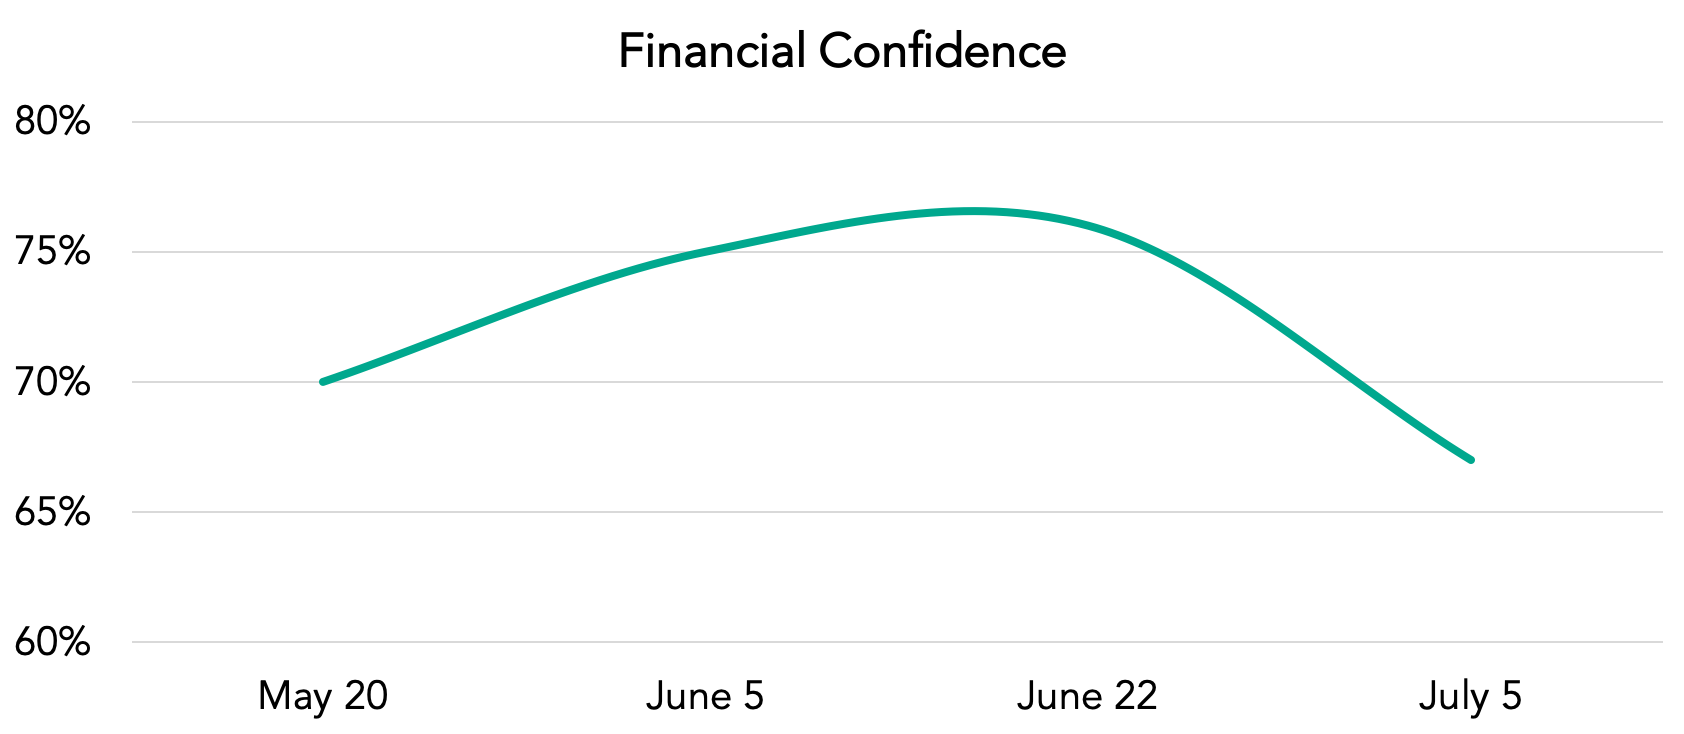 line chart of financial confidence during covid-19